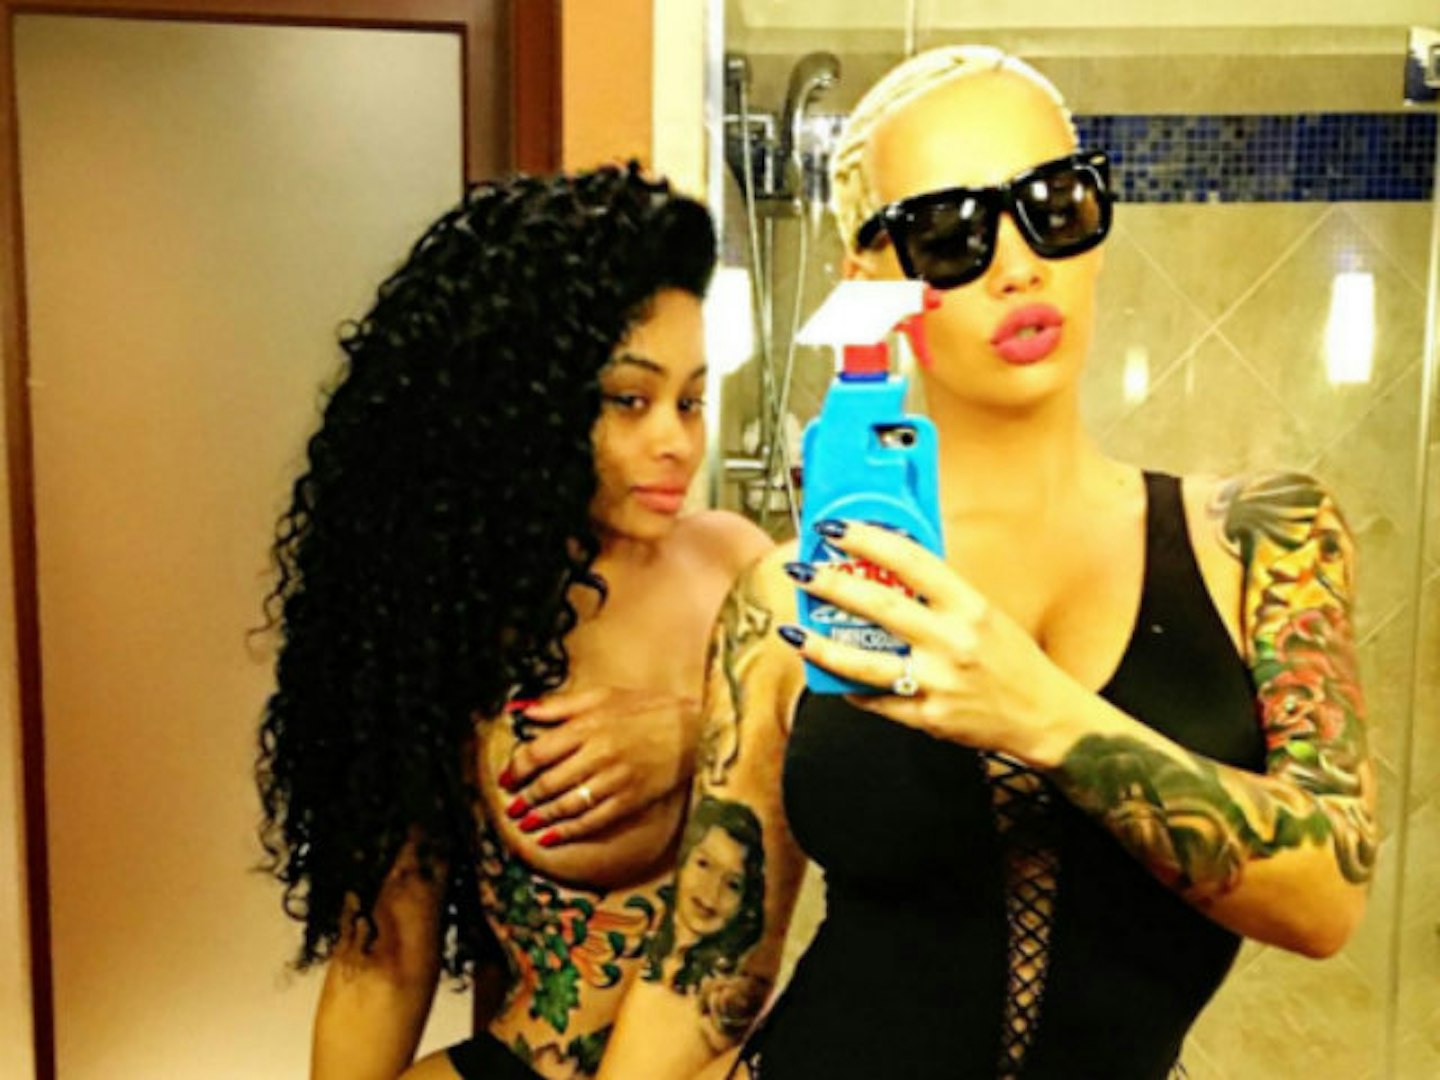 Blac Chyna and Amber Rose